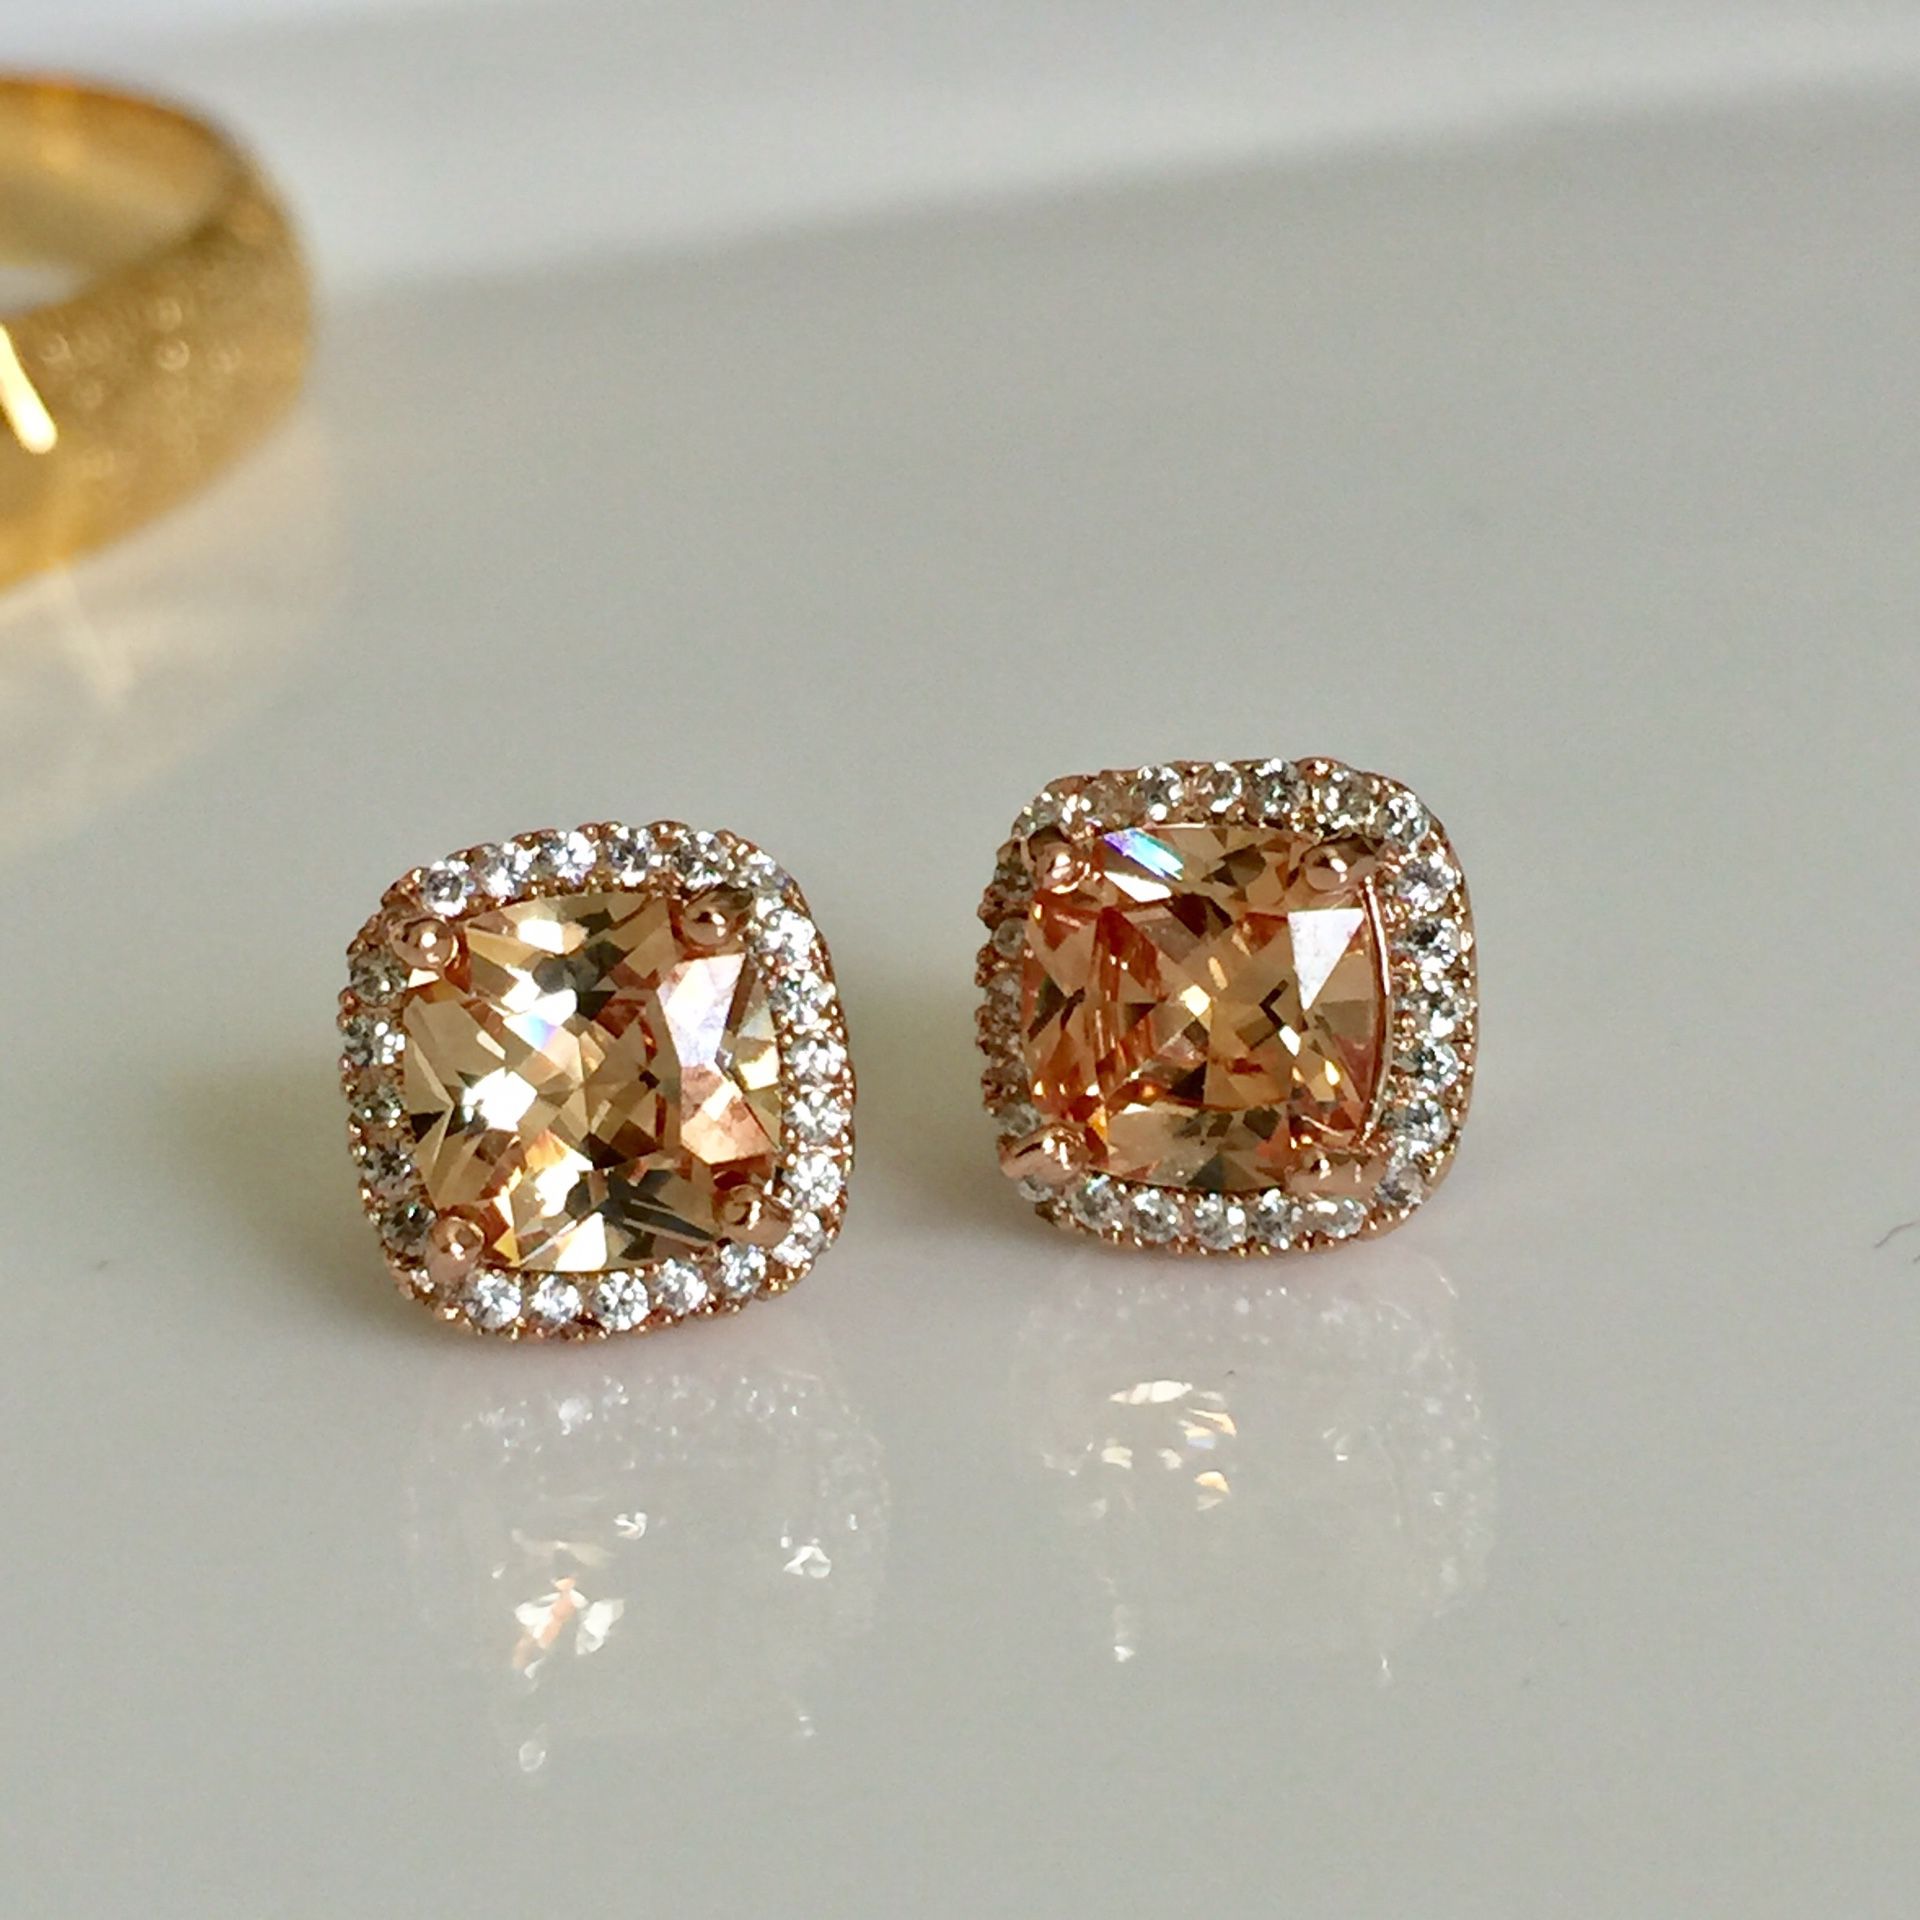 18k gold plated champagne studs earrings